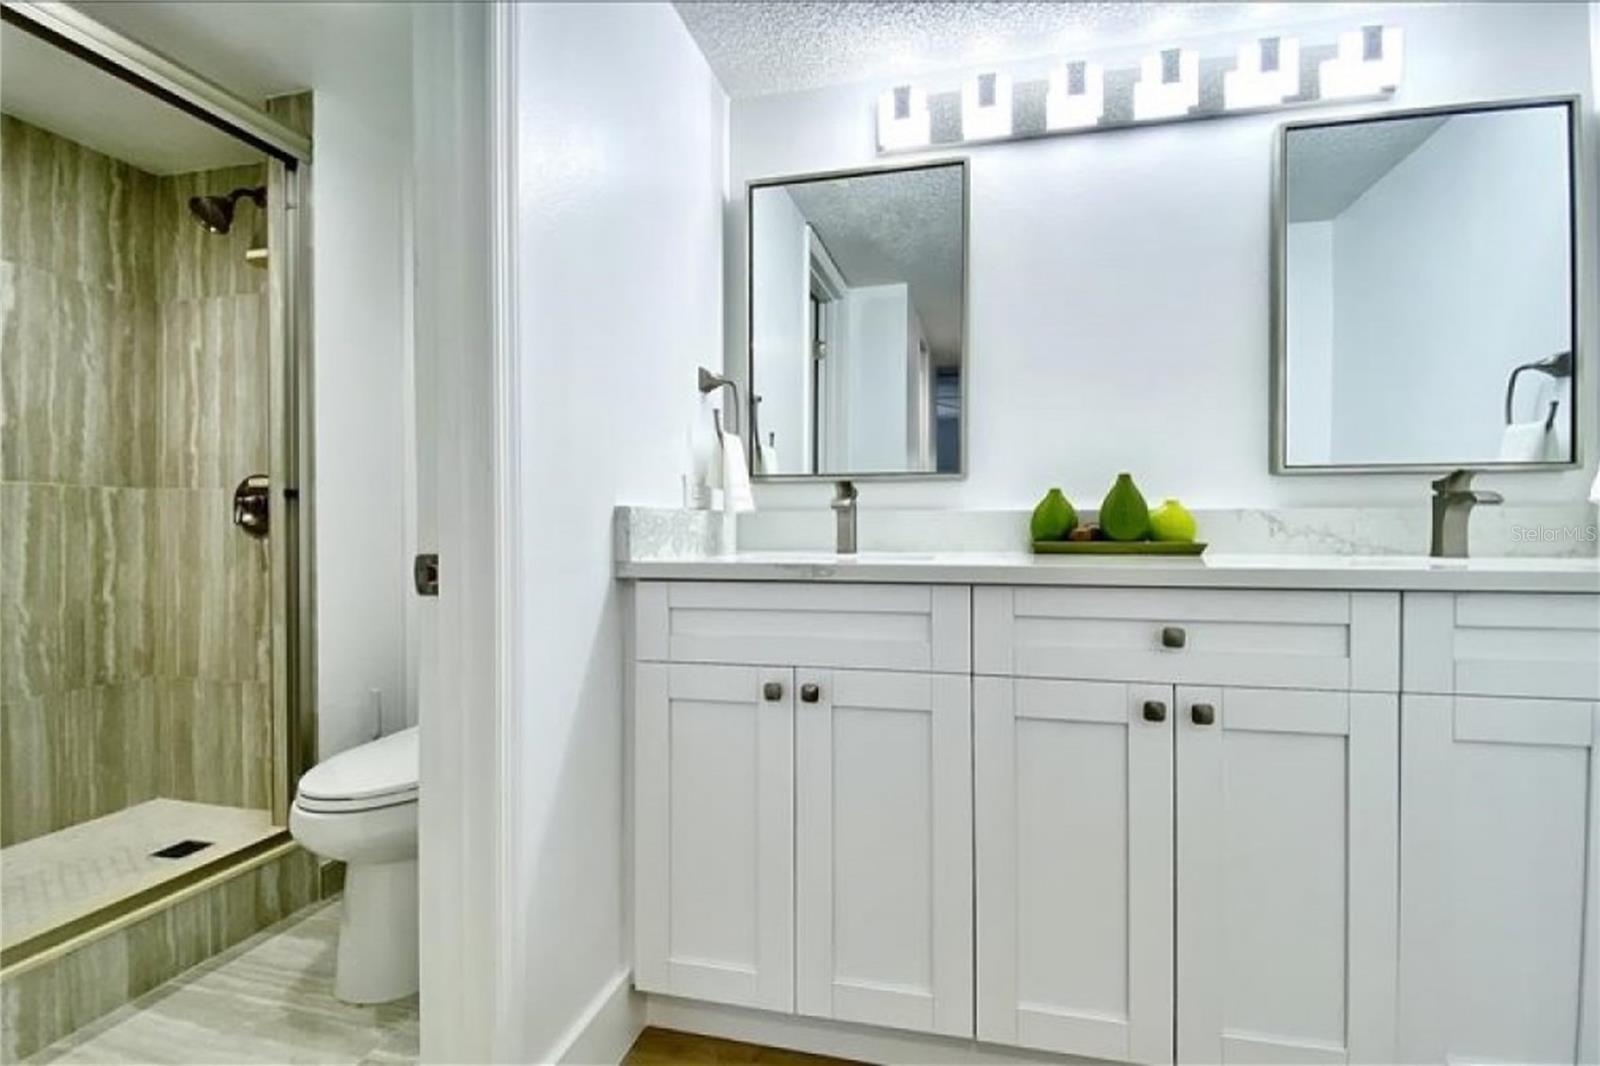 Primary bath with double sinks, granite counters, large step in shower